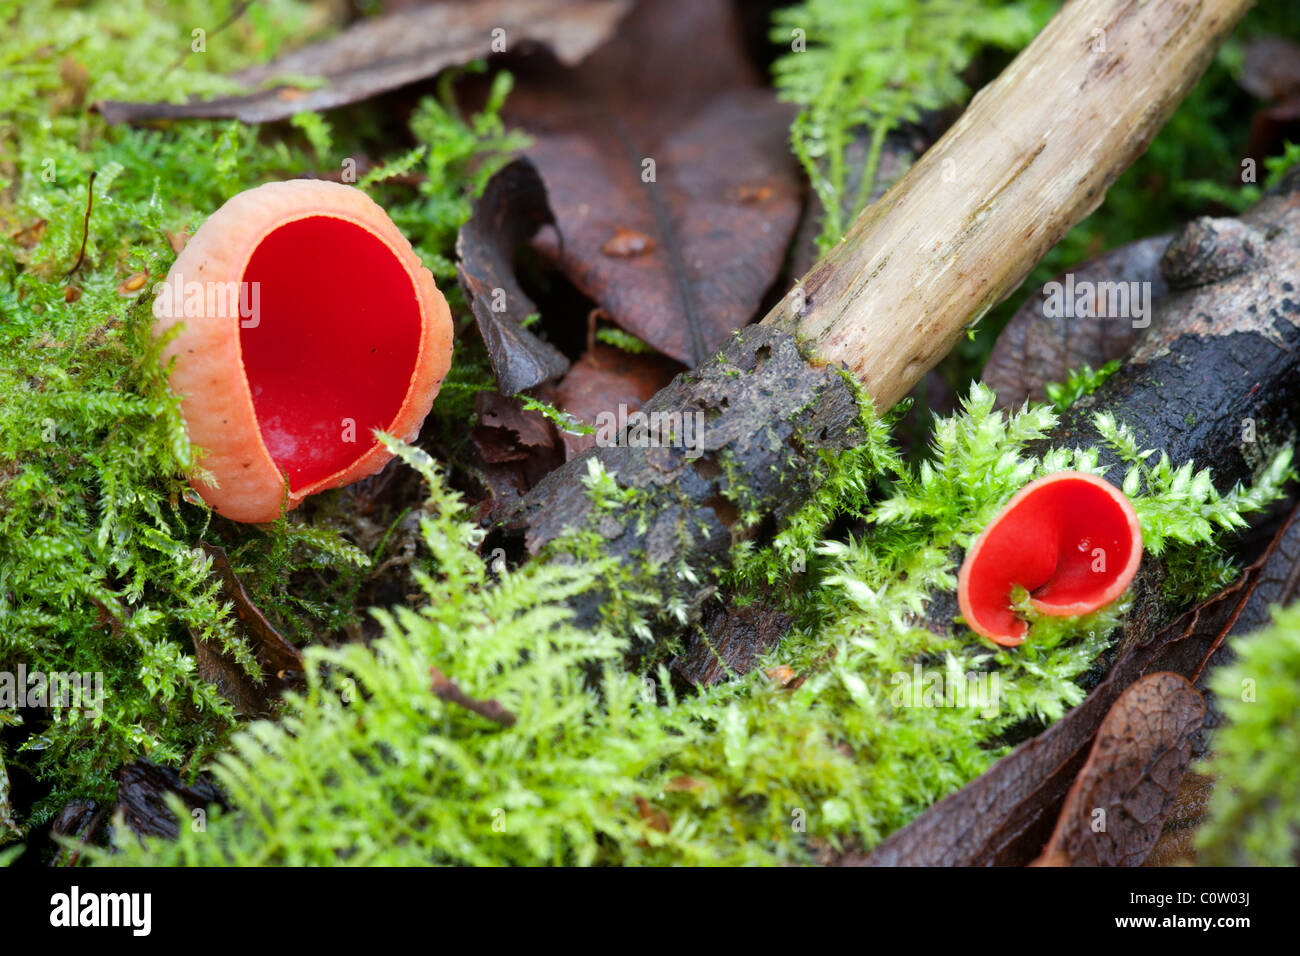 Scarlet Elf Cup Sarcoscypha coccinea fungi fruiting bodies growing in moss on dead branches Stock Photo